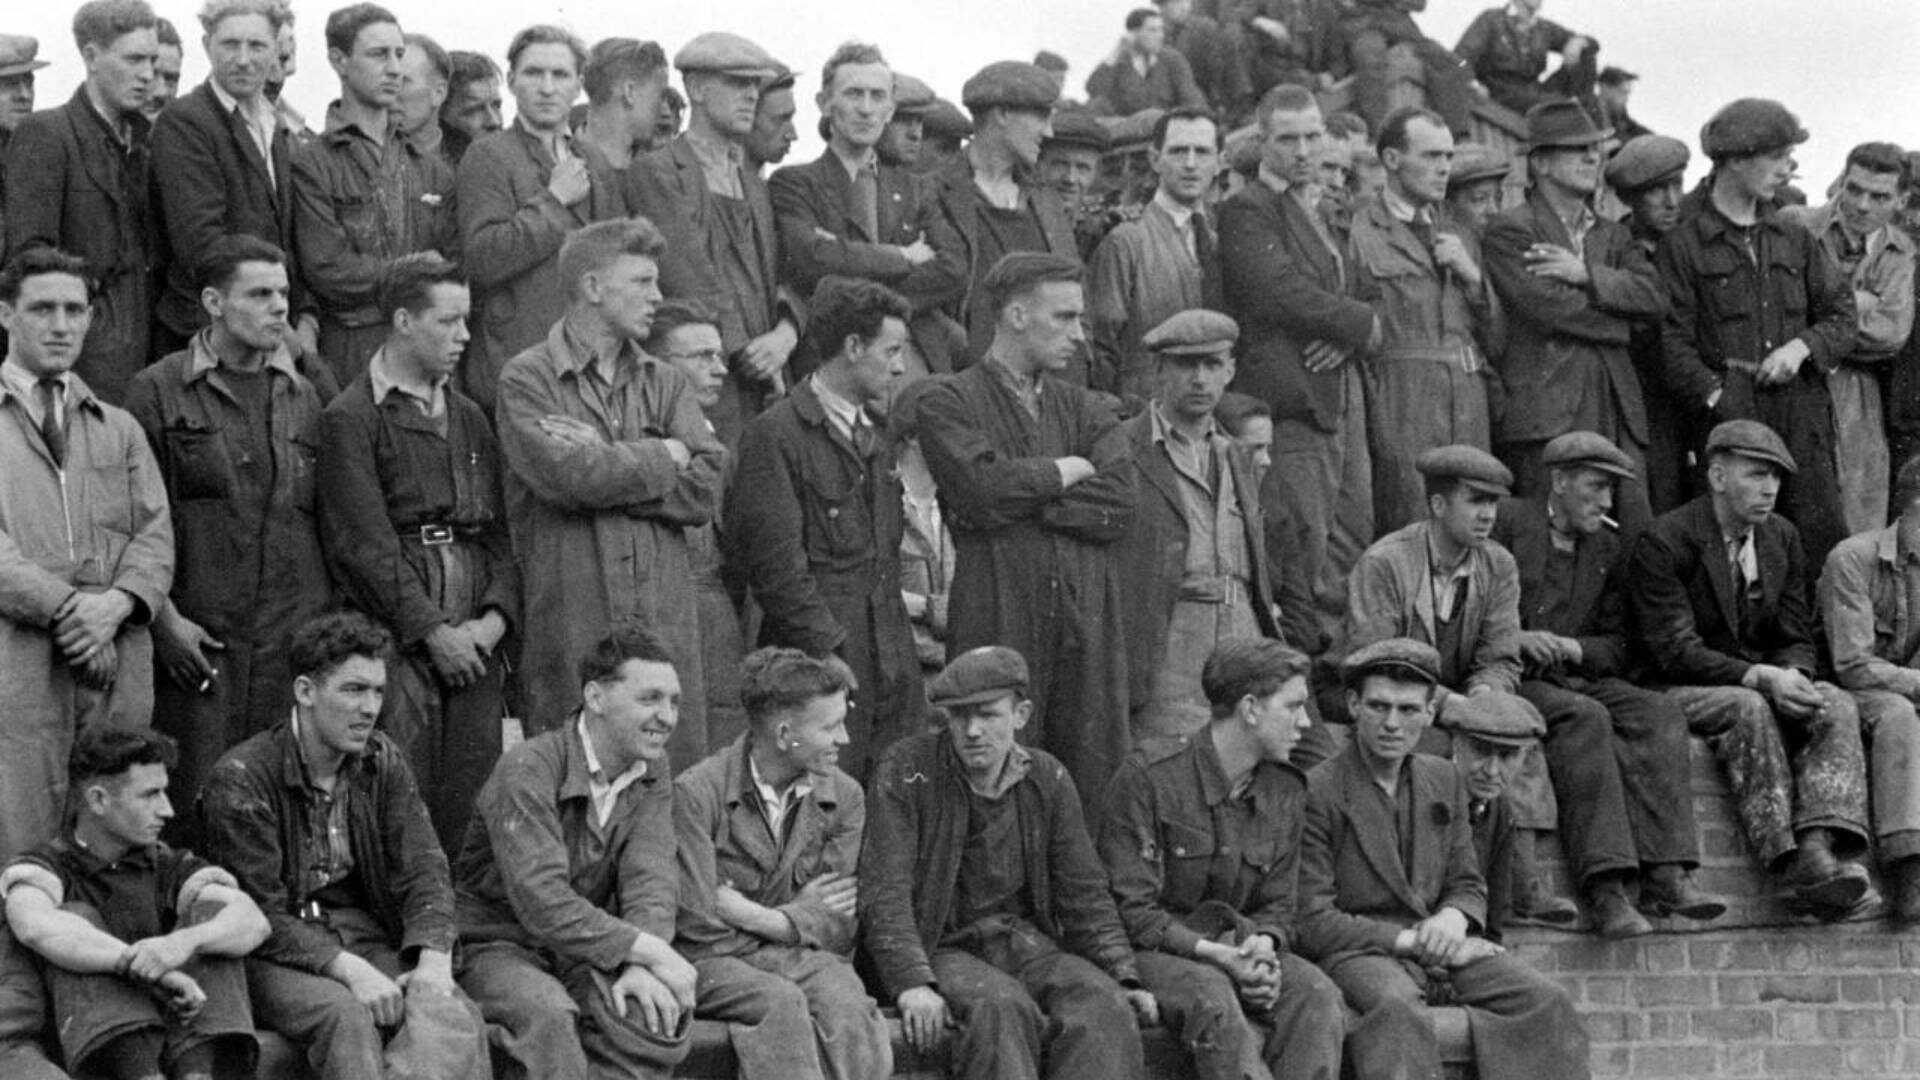 Civilians in workwear, most likely employees of the Harland and Wolff Ltd. shipyard in Belfast have an excellent vantage point to watch the arrival of H.M.S. Phoebe at Musgrave Channel, Belfast.